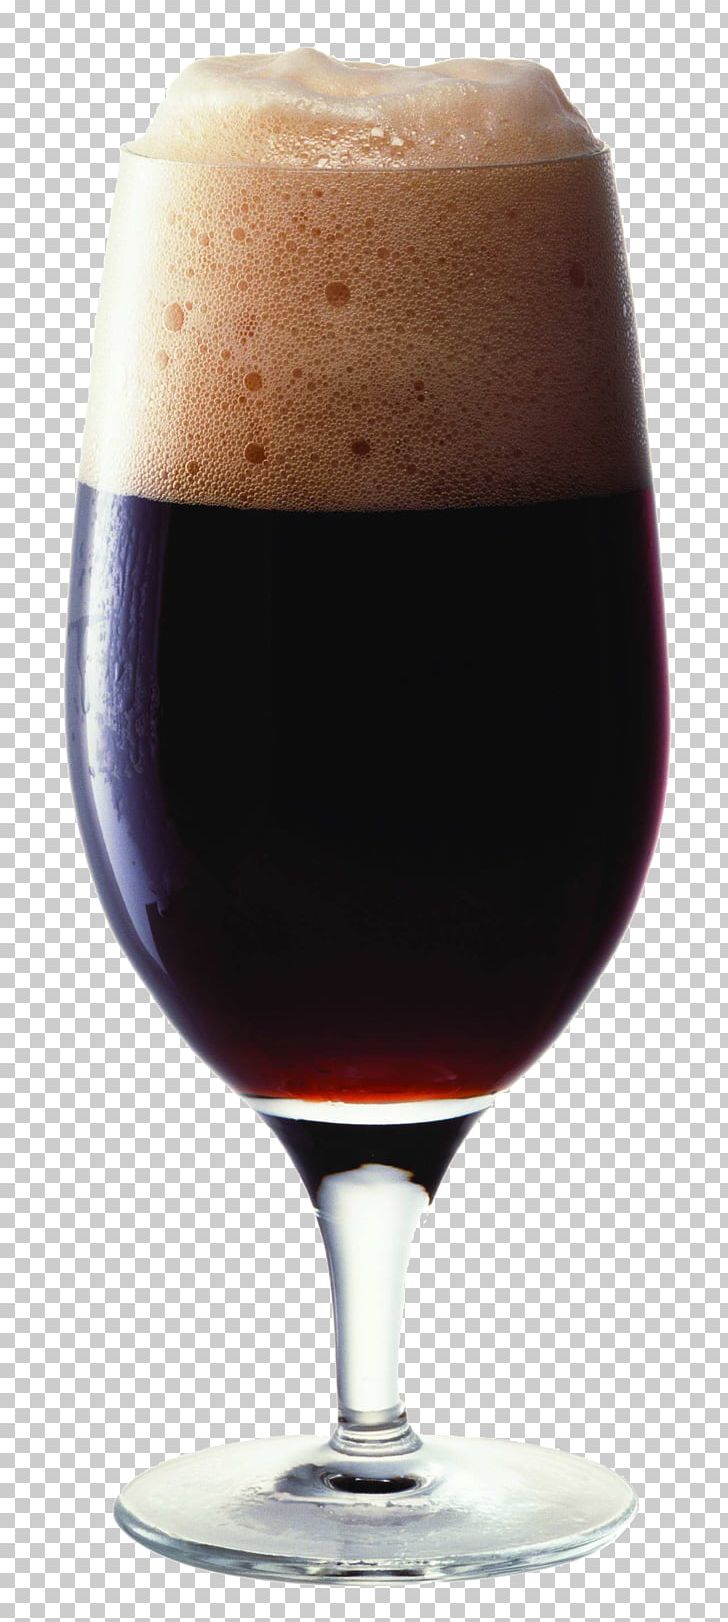 Beer Stout Wine Drink PNG, Clipart, Alcoholic Beverage, Beer, Beer Glass, Beer Glassware, Cup Free PNG Download